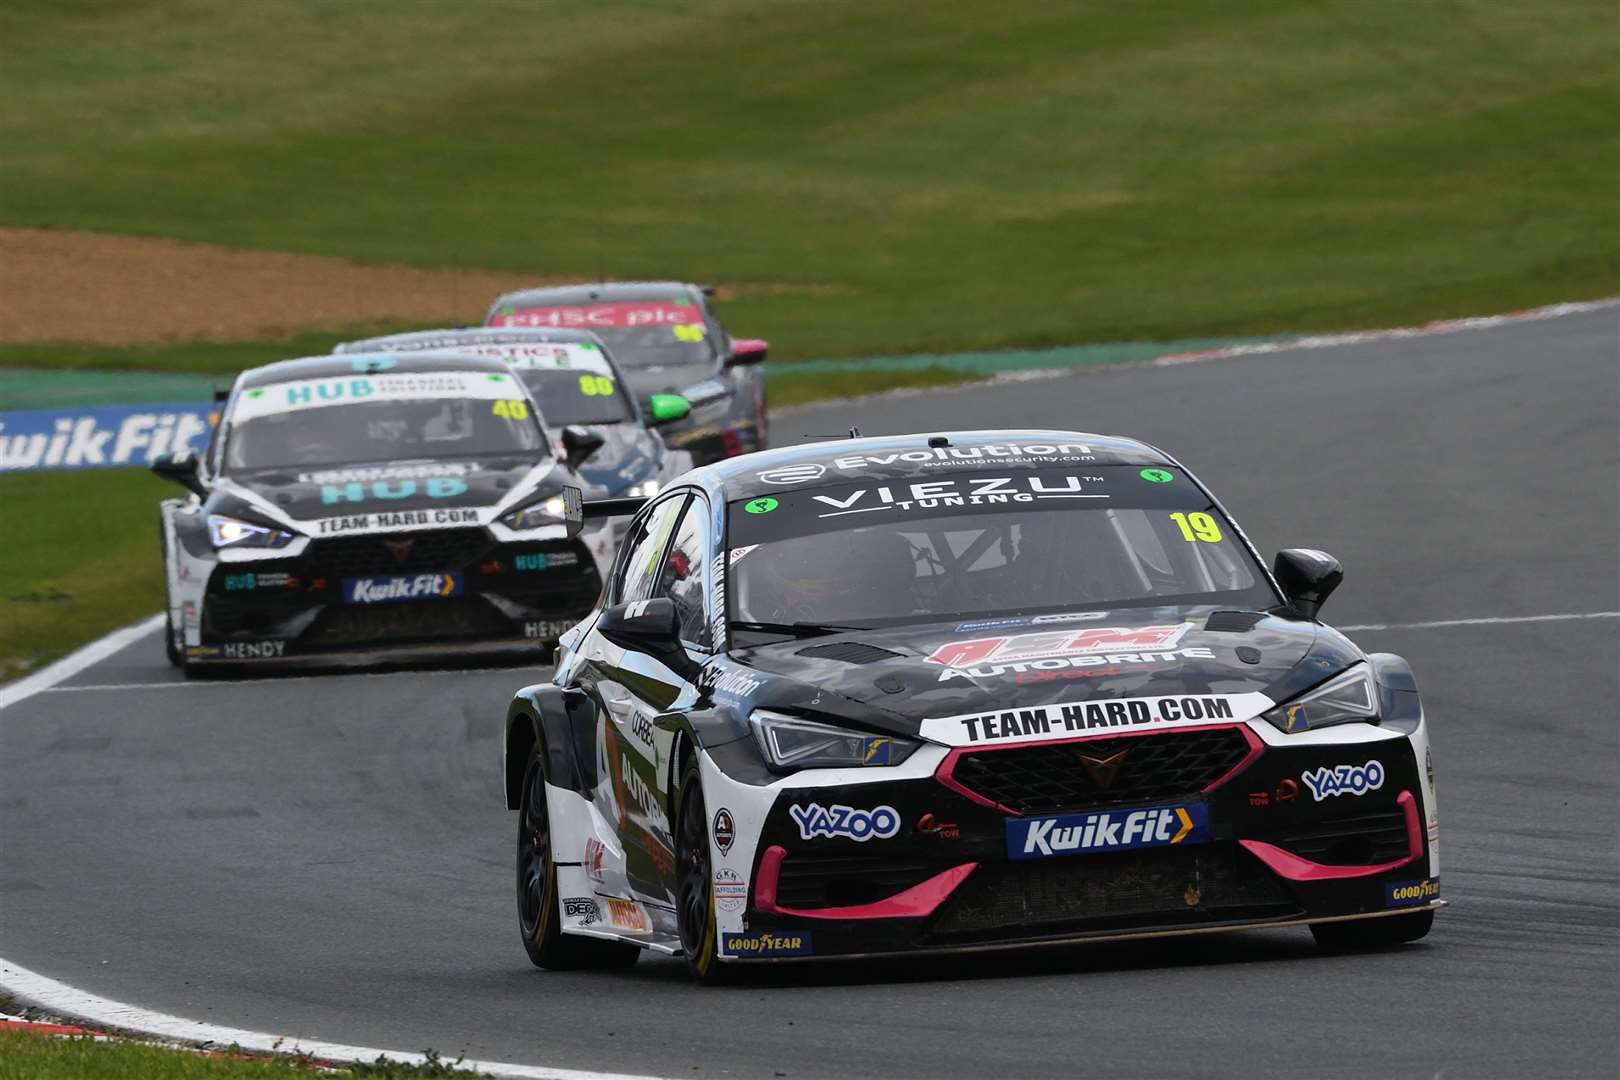 Jack Mitchell, from Wrotham, finished 17th and 21st in the BTCC races for Detling-based Team Hard. He retired from race three after crashing at Hawthorn